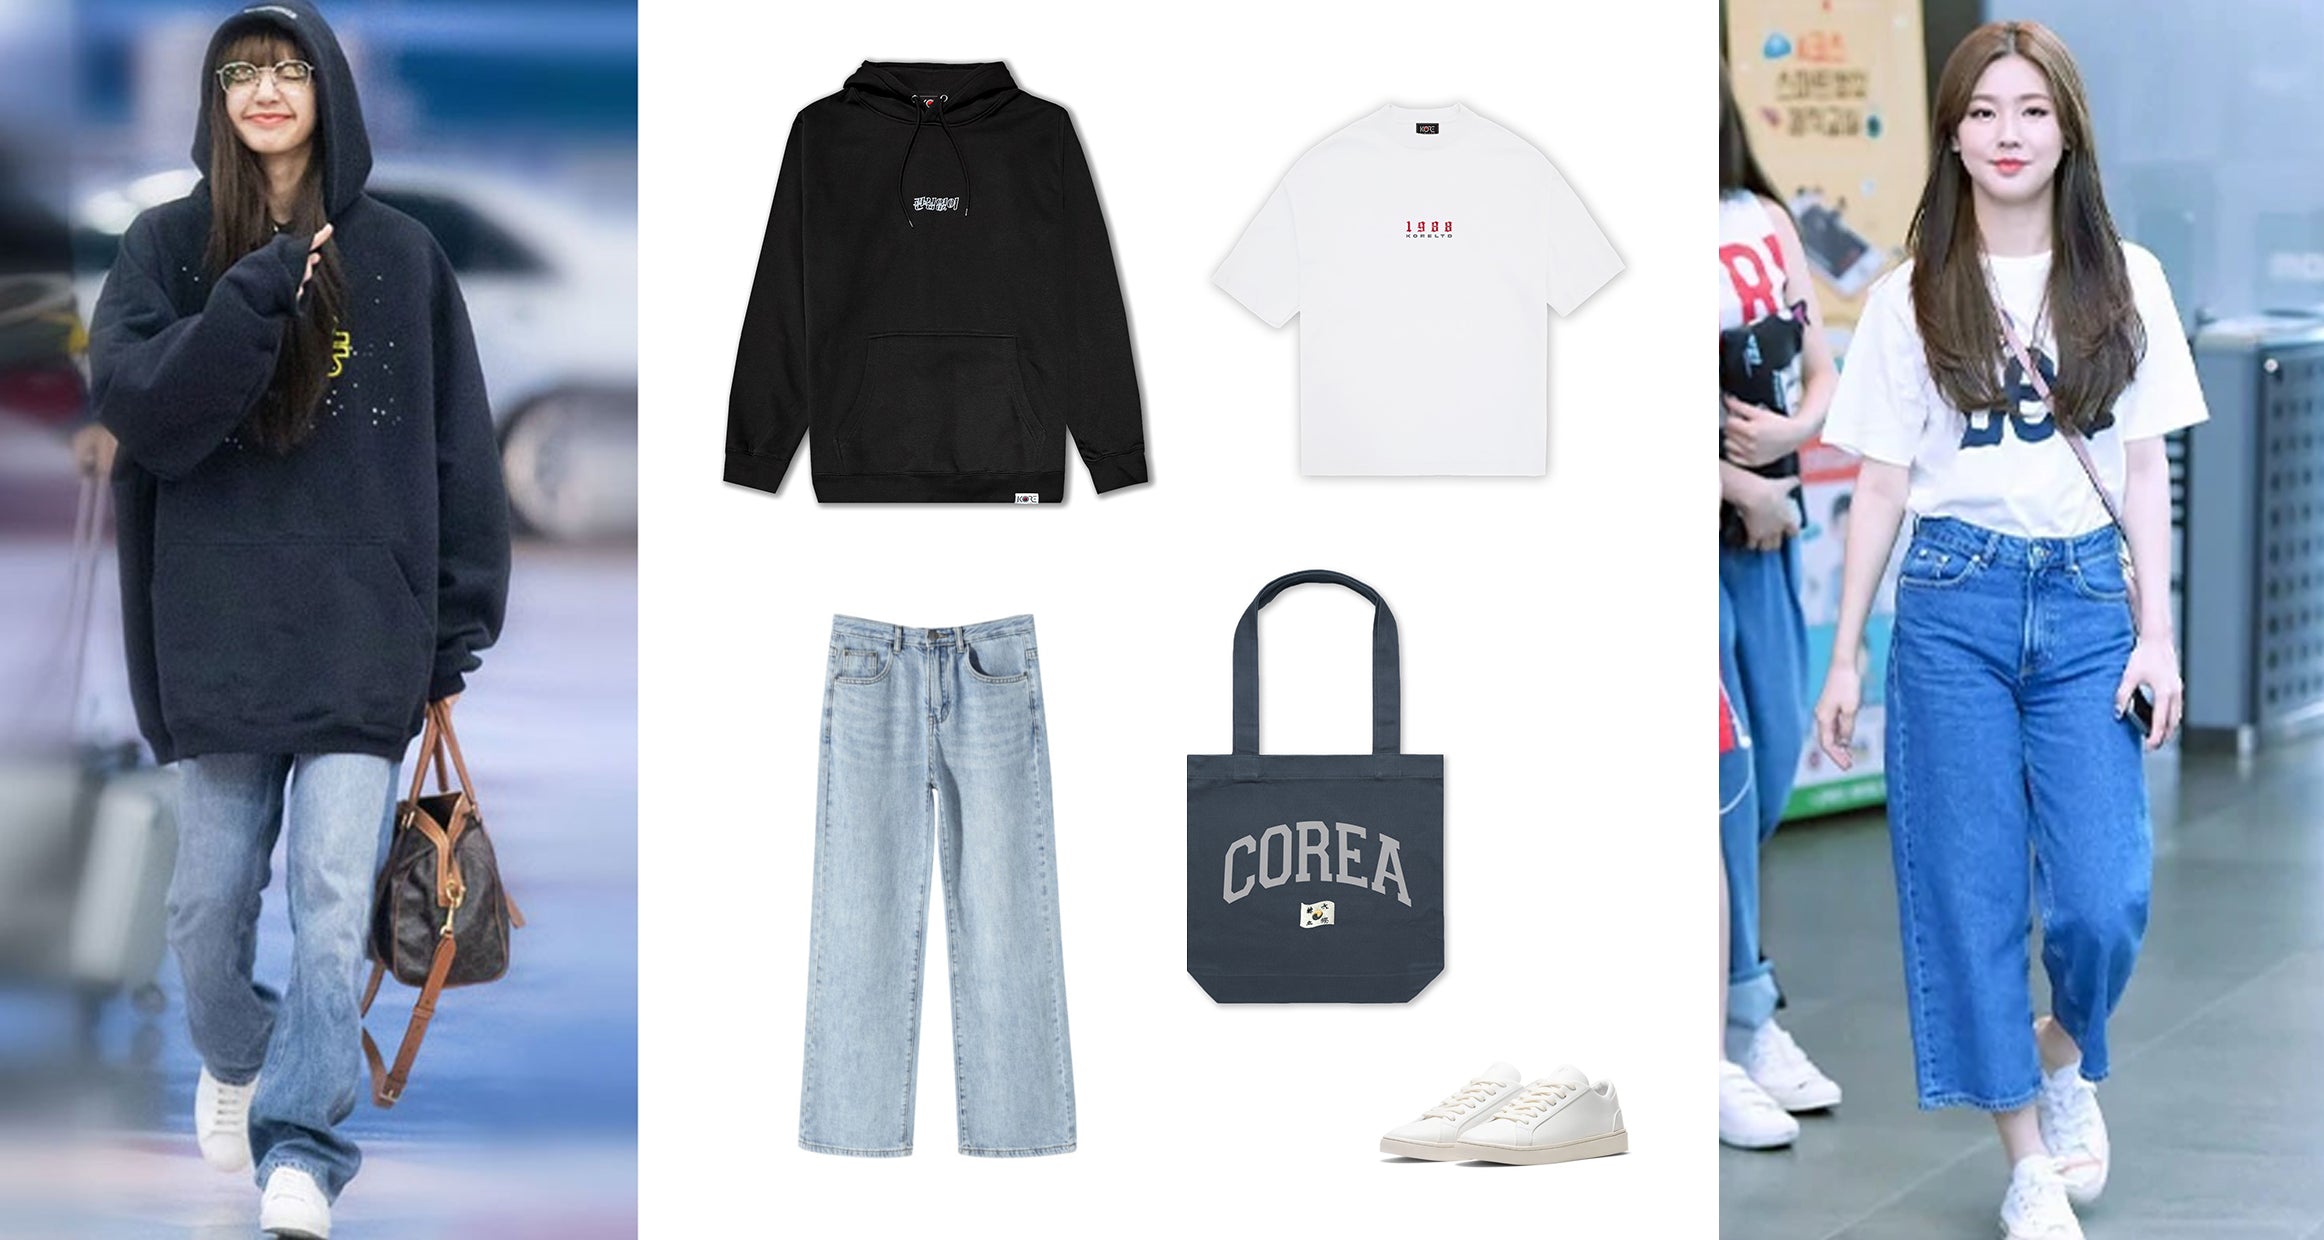 Kpop idol airport fashion with Blackpink Lisa outfit inspo KORE Limited hoodie